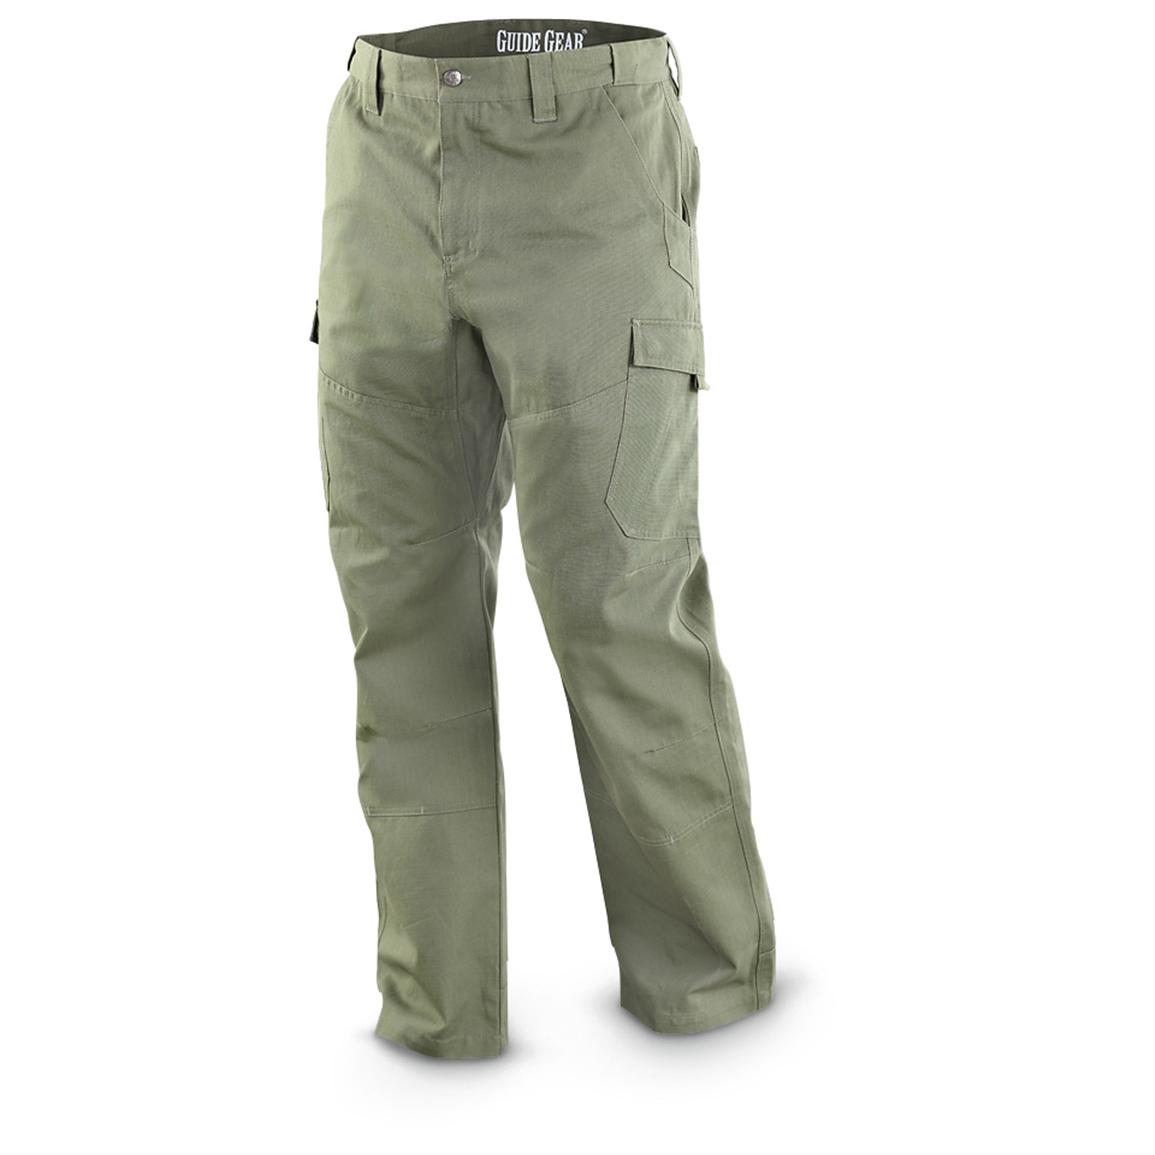 Guide Gear® Ripstop Cargo Work Pants - 581148, Jeans & Pants at 365 ...